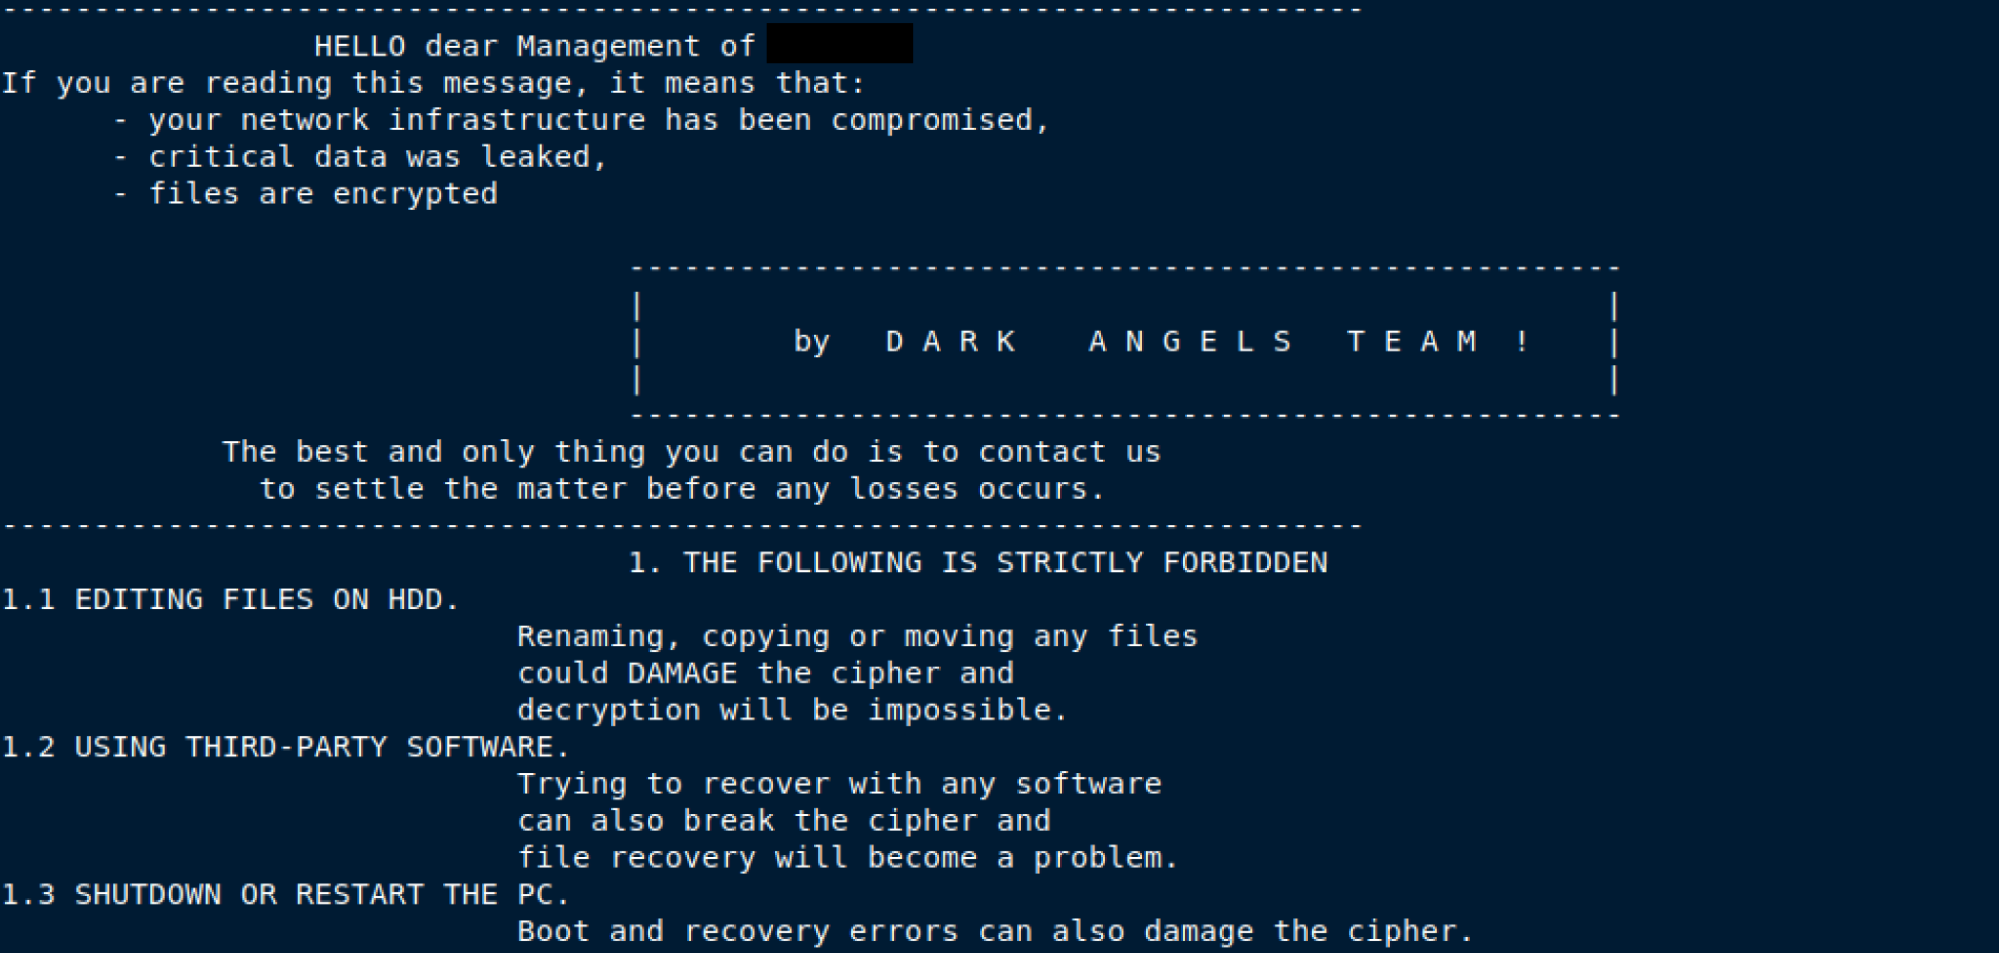 Additional Linux Ransomware Likely Underway